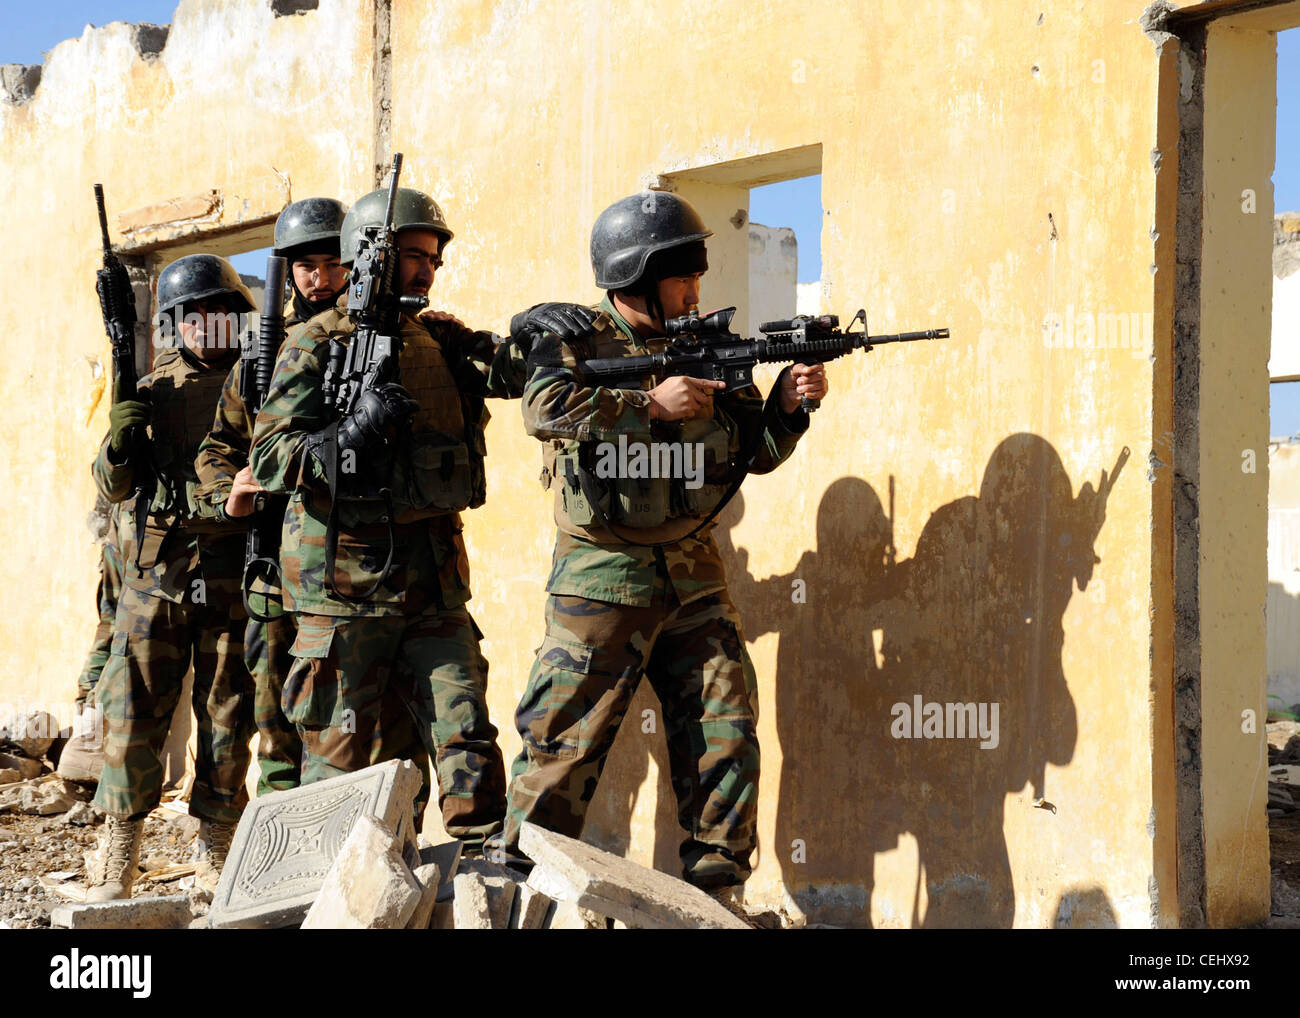 Soldiers from the 8th Commando Kandak prepare to enter a room during a training exercise in Tarin Kowt district, Uruzgan province, Afghanistan, Feb. 14. The 8th Commando Kandak partners with coalition Special Operations Forces to conduct operations throughout Uruzgan and Zabul provinces. Stock Photo